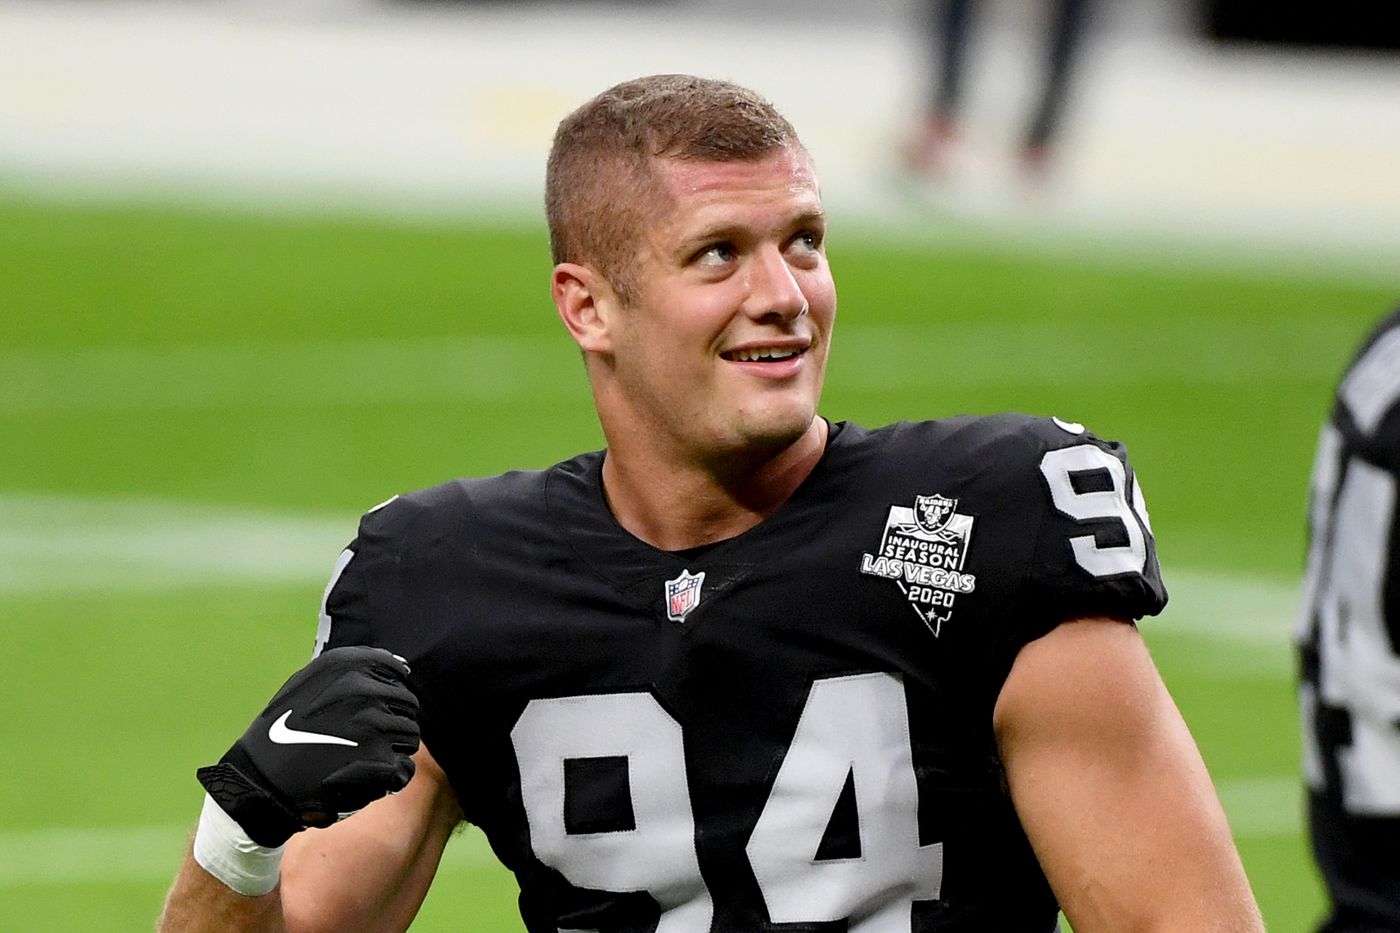 Raiders lineman Carl Nassib comes out as gay - Outsports